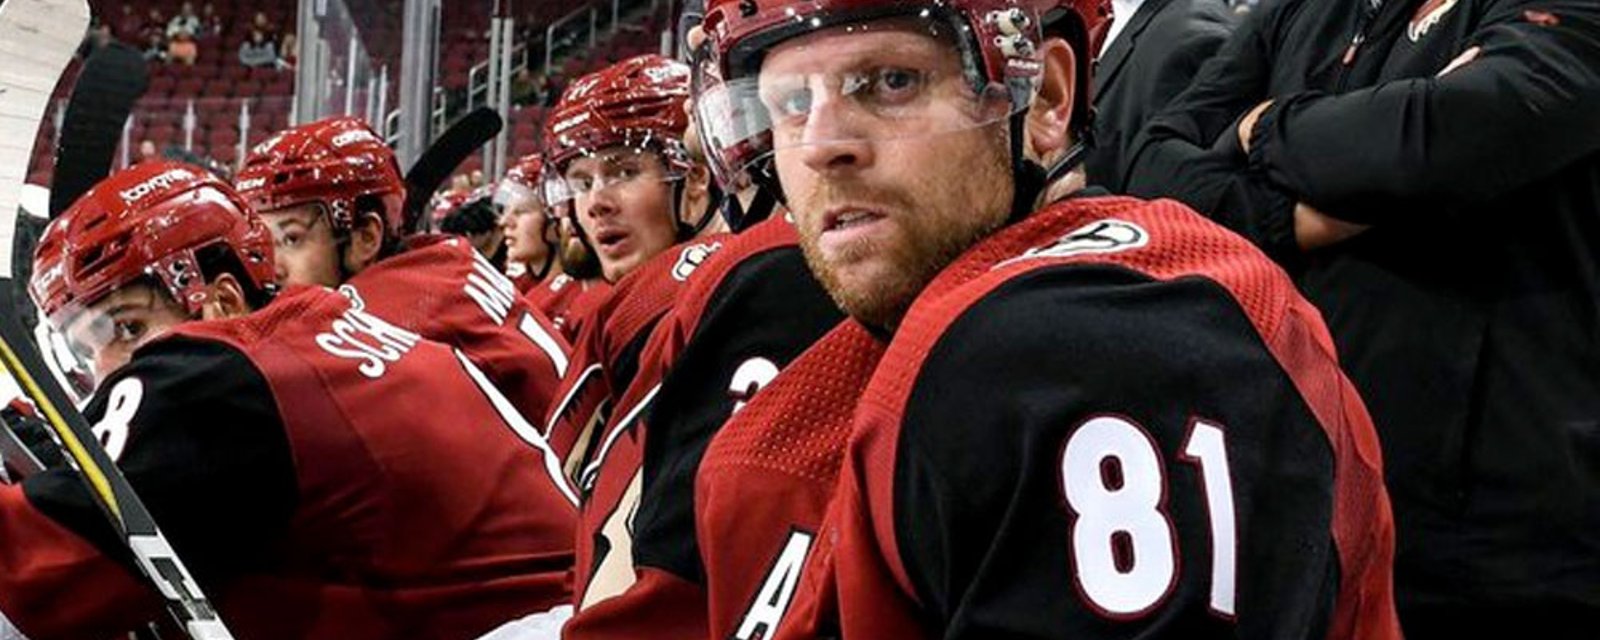 Kessel scores his first goal as a member of the Coyotes